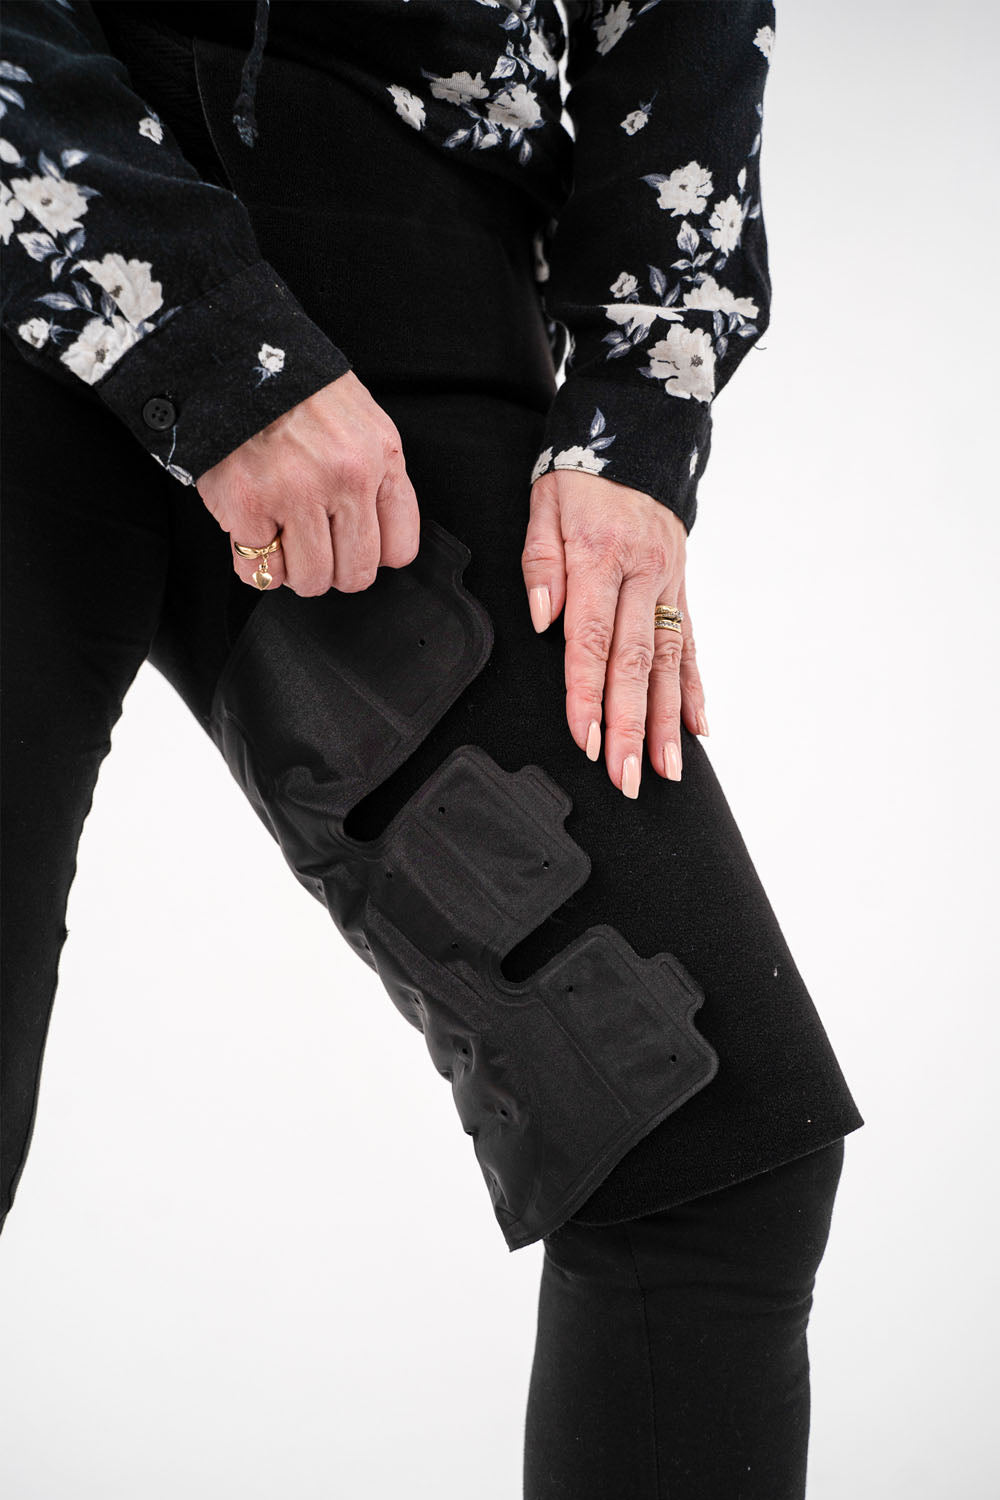 aero-wrap thigh secure fit on thigh to prevent dvt